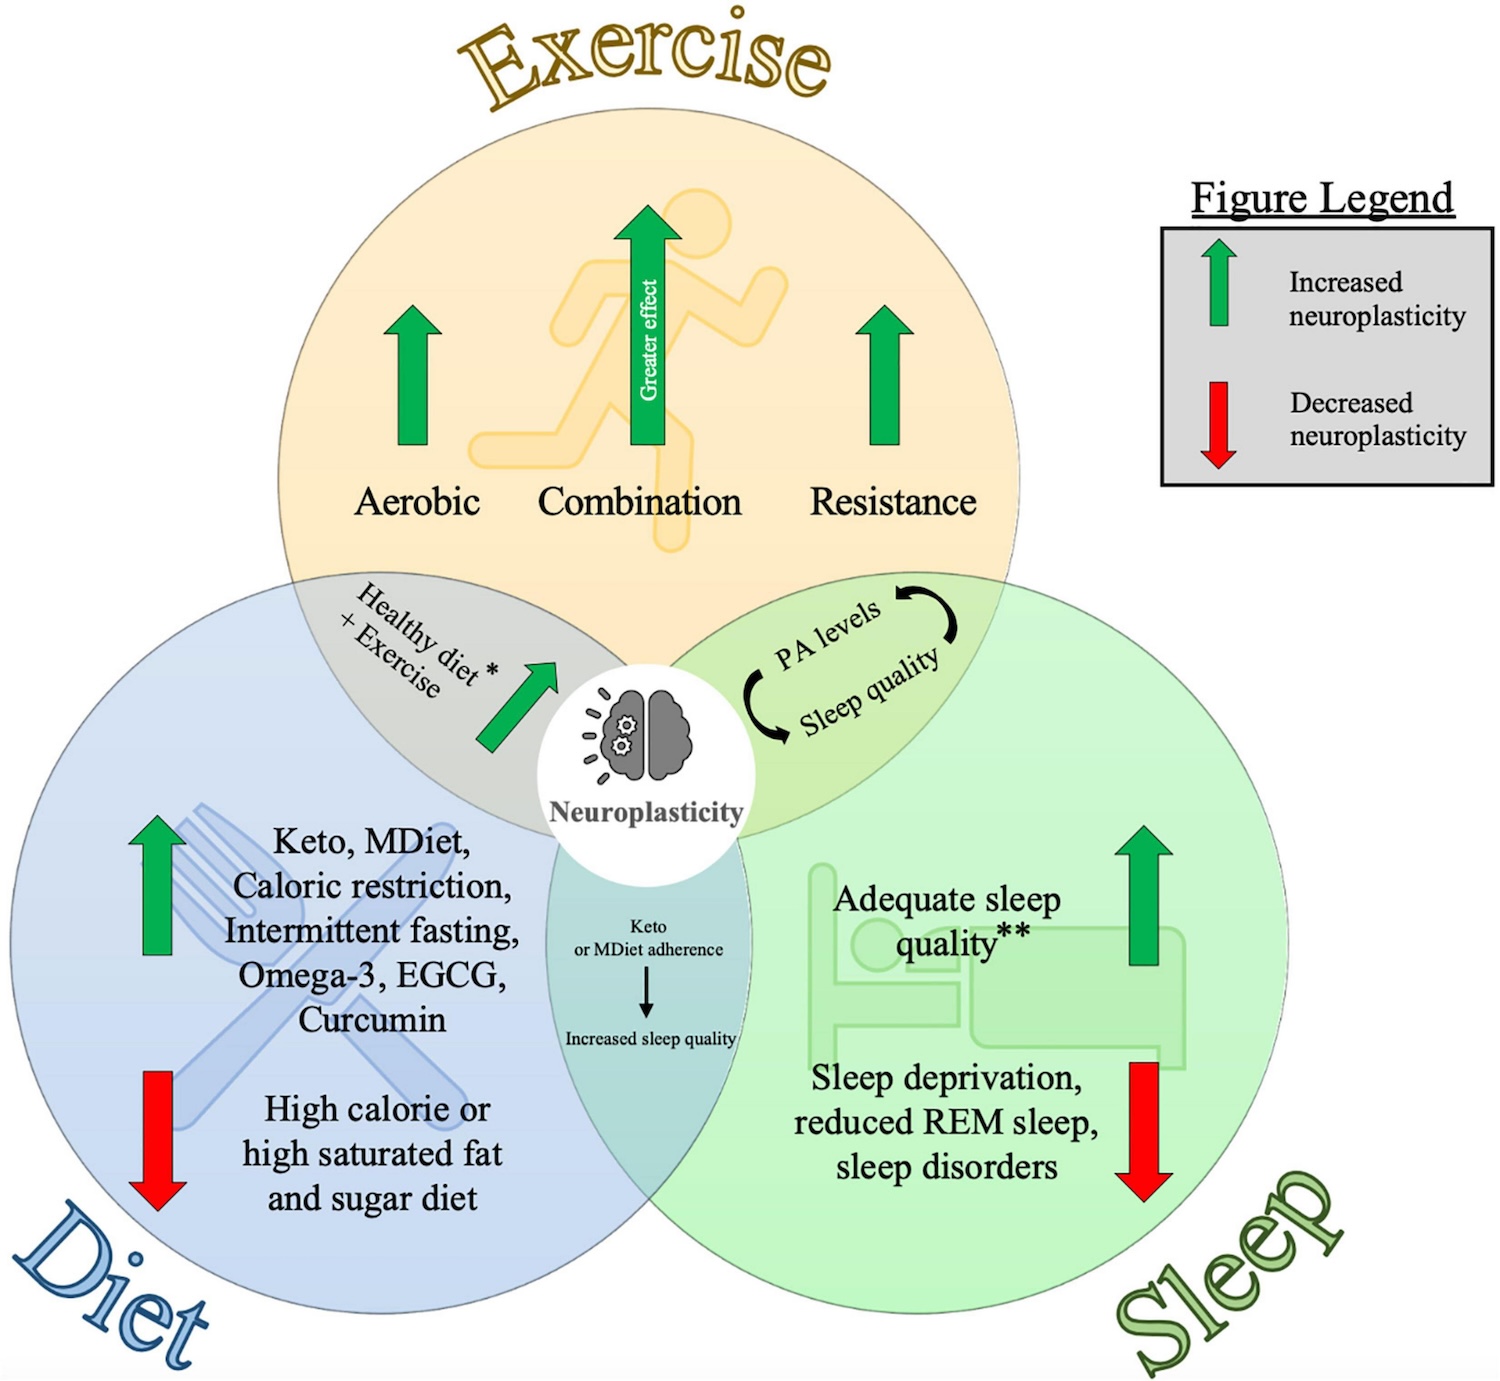 Diagram representing the individual and combined influences of exercise, diet and sleep on neuroplasticity